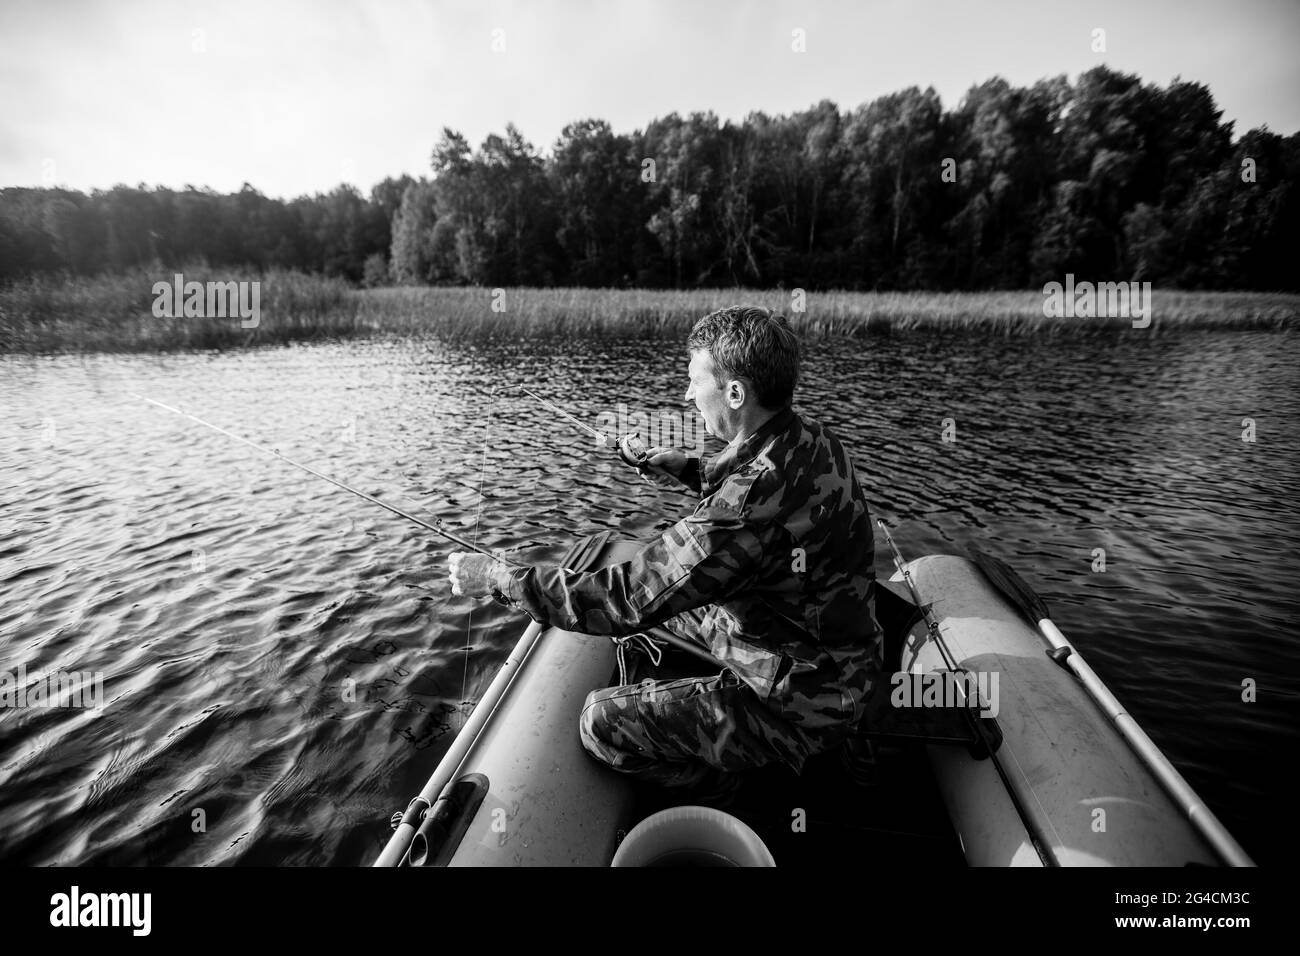 A Man in a Camouflage Suit and Cap Sits in a Boat with a Fishing